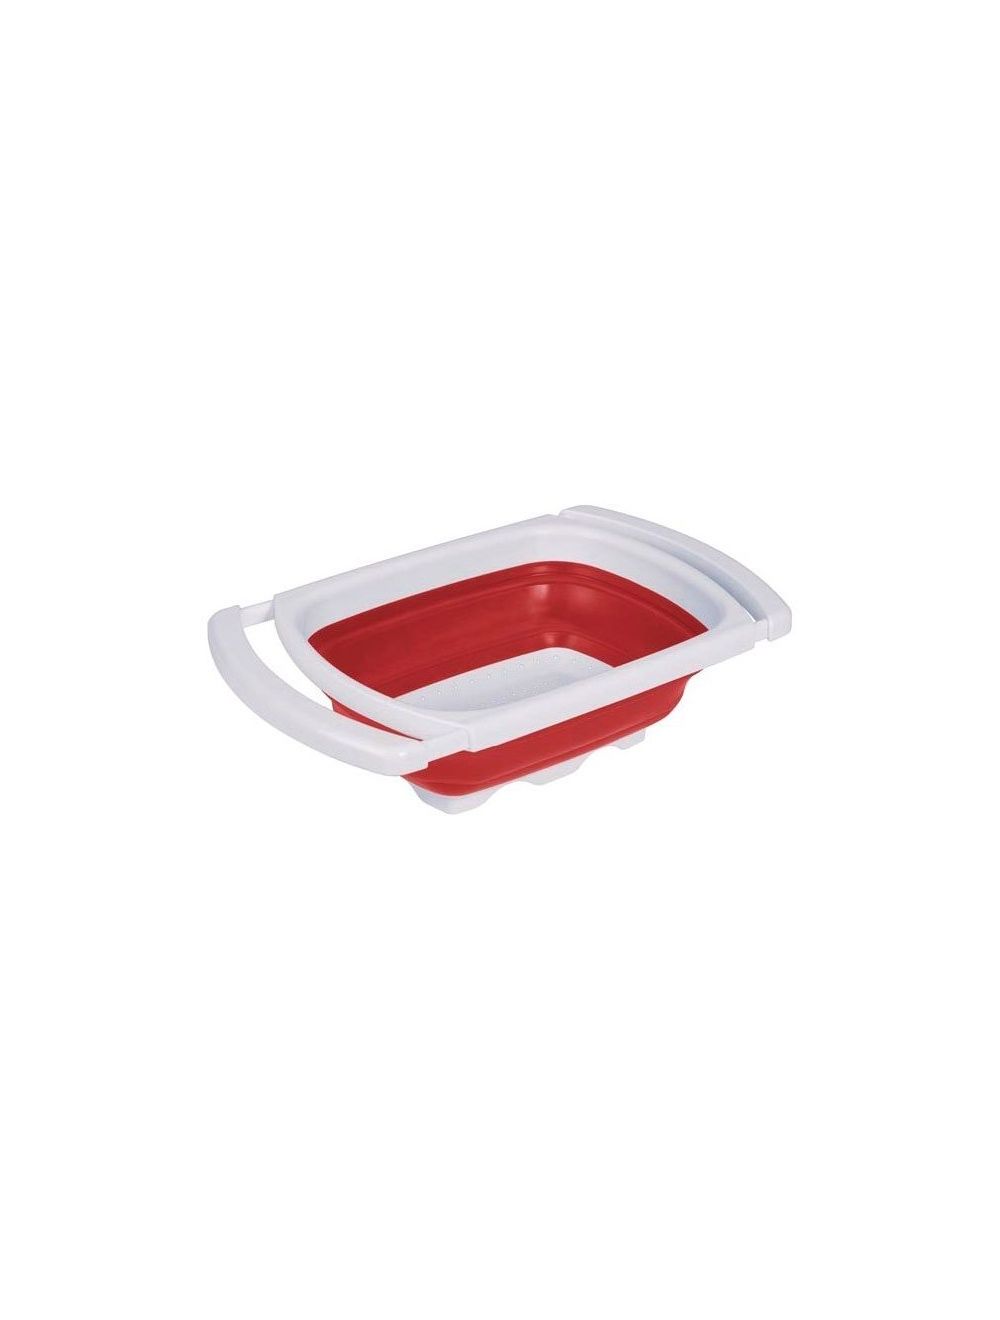 Sink Foldable Colander - Red And White 26 cm